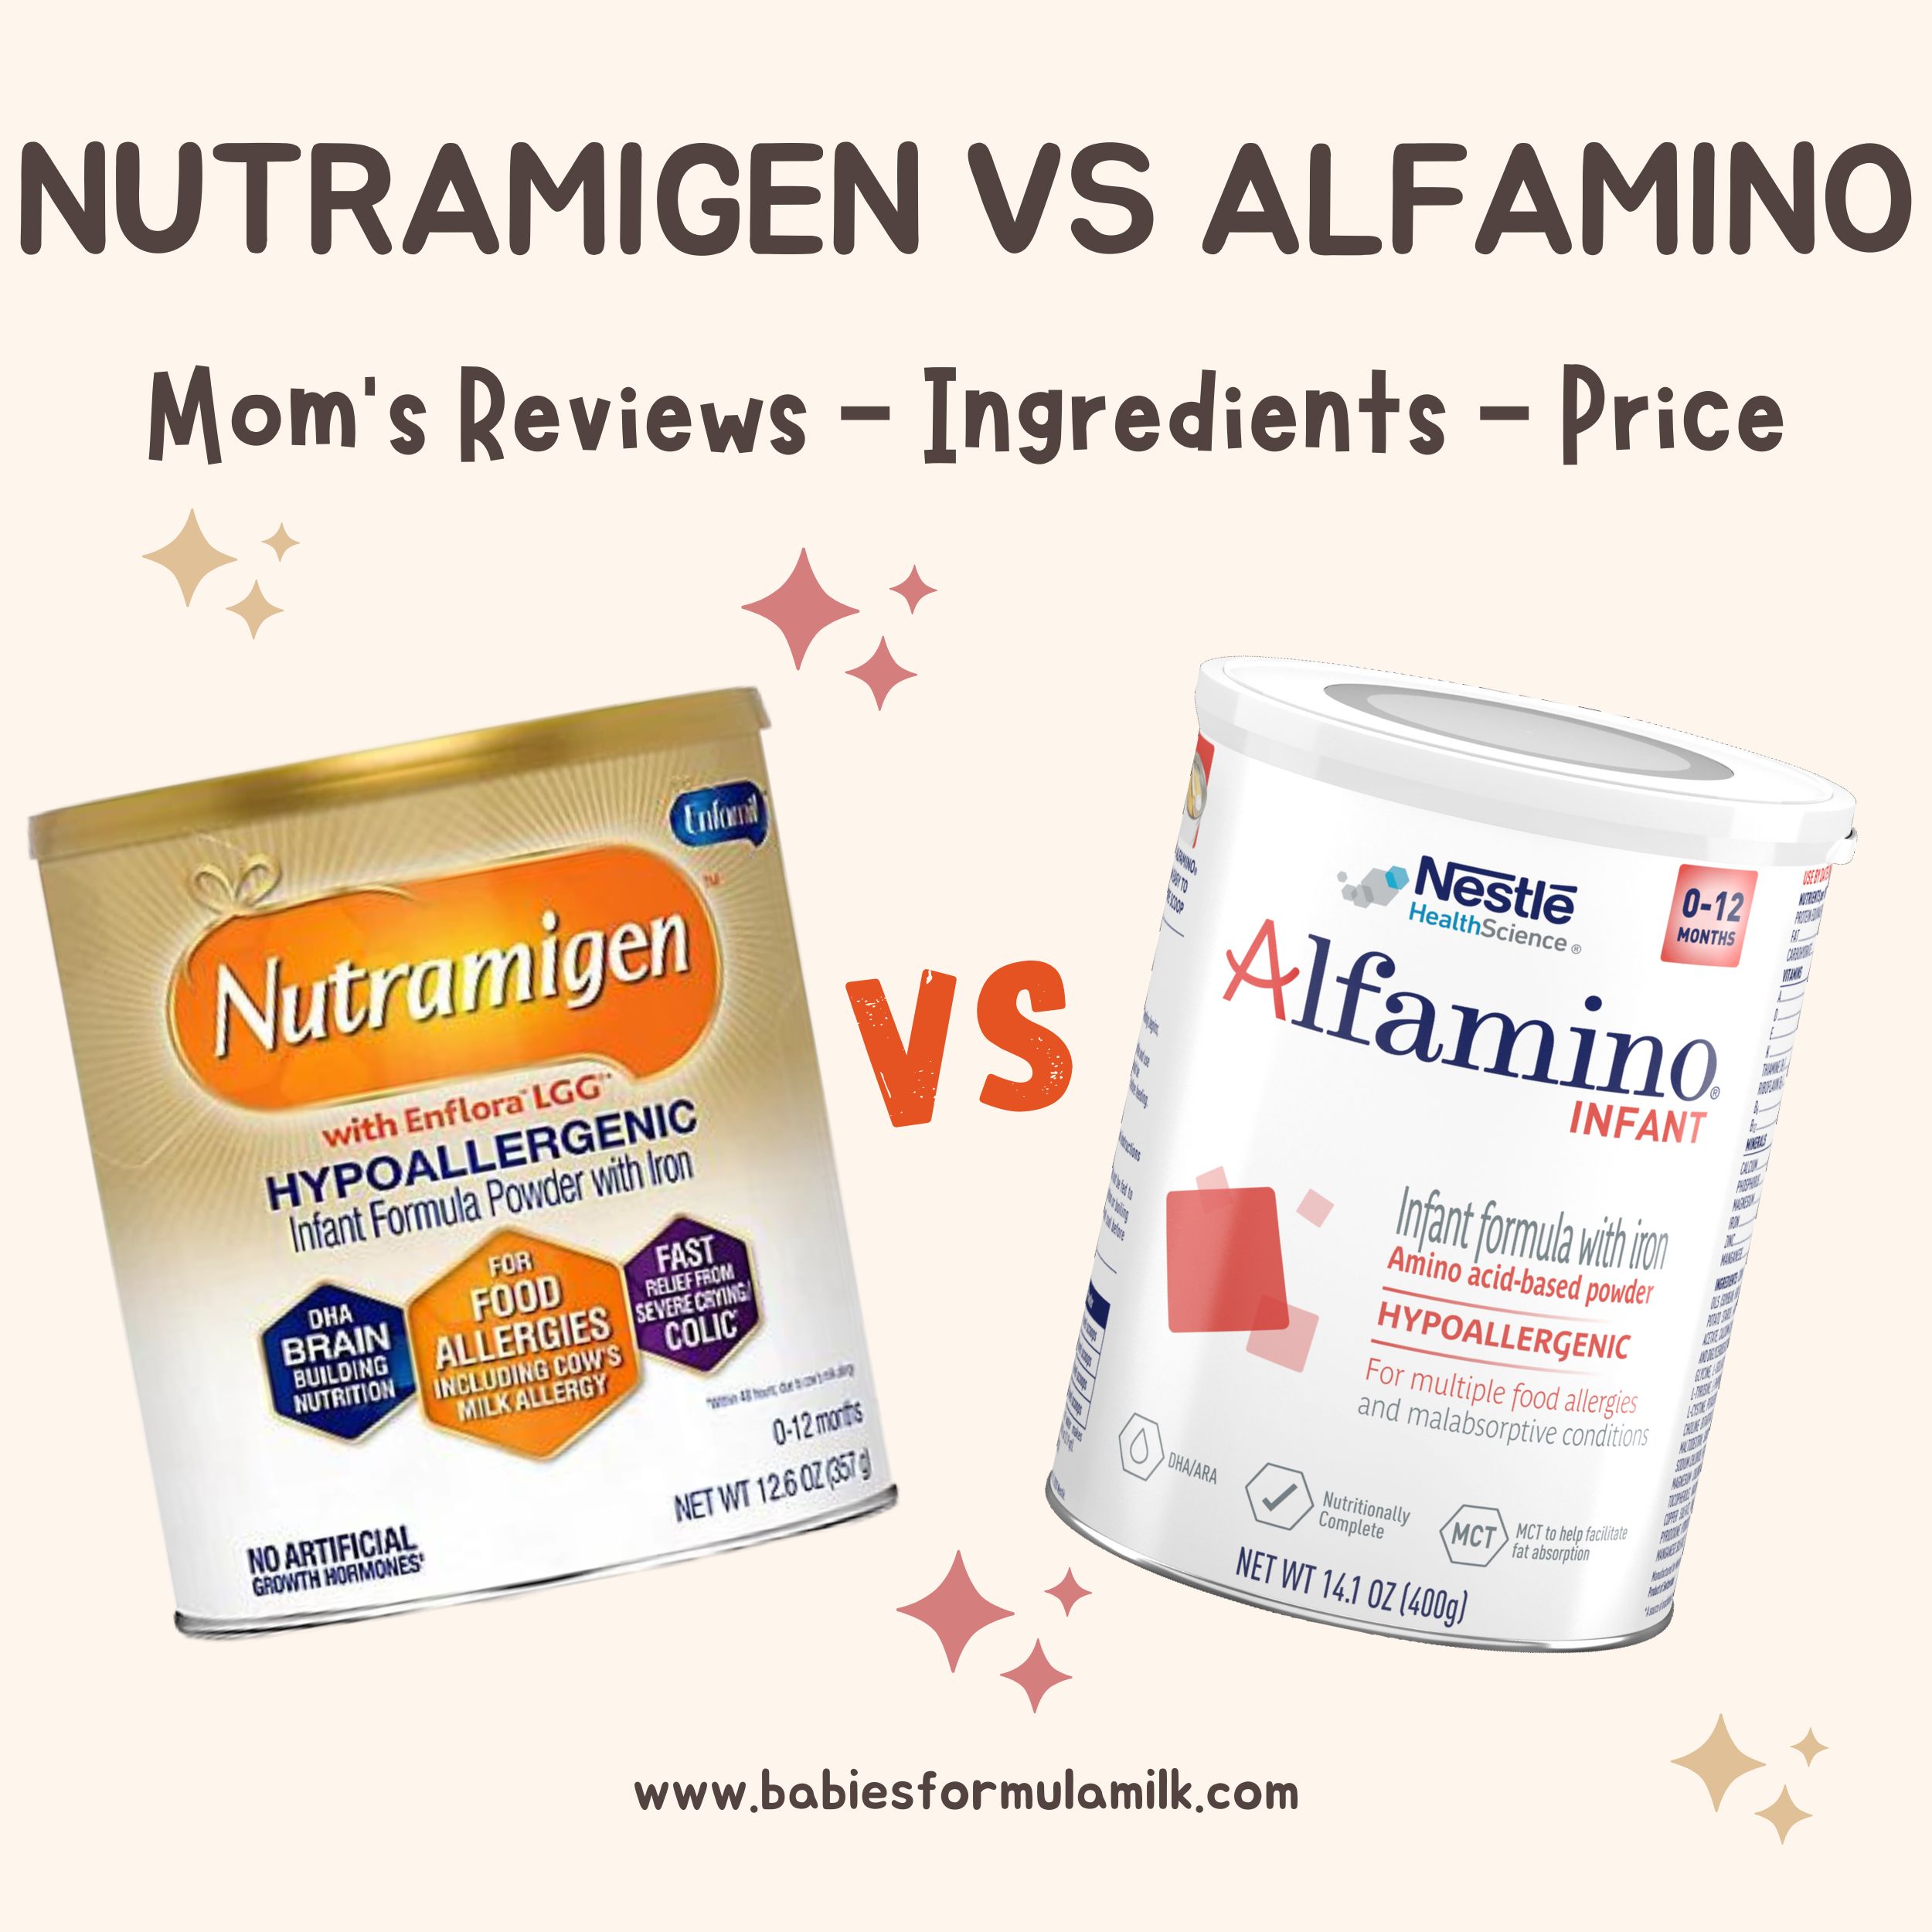 You are currently viewing Nutramigen Vs Alfamino: Mom’s Reviews, Ingredients, and Prices